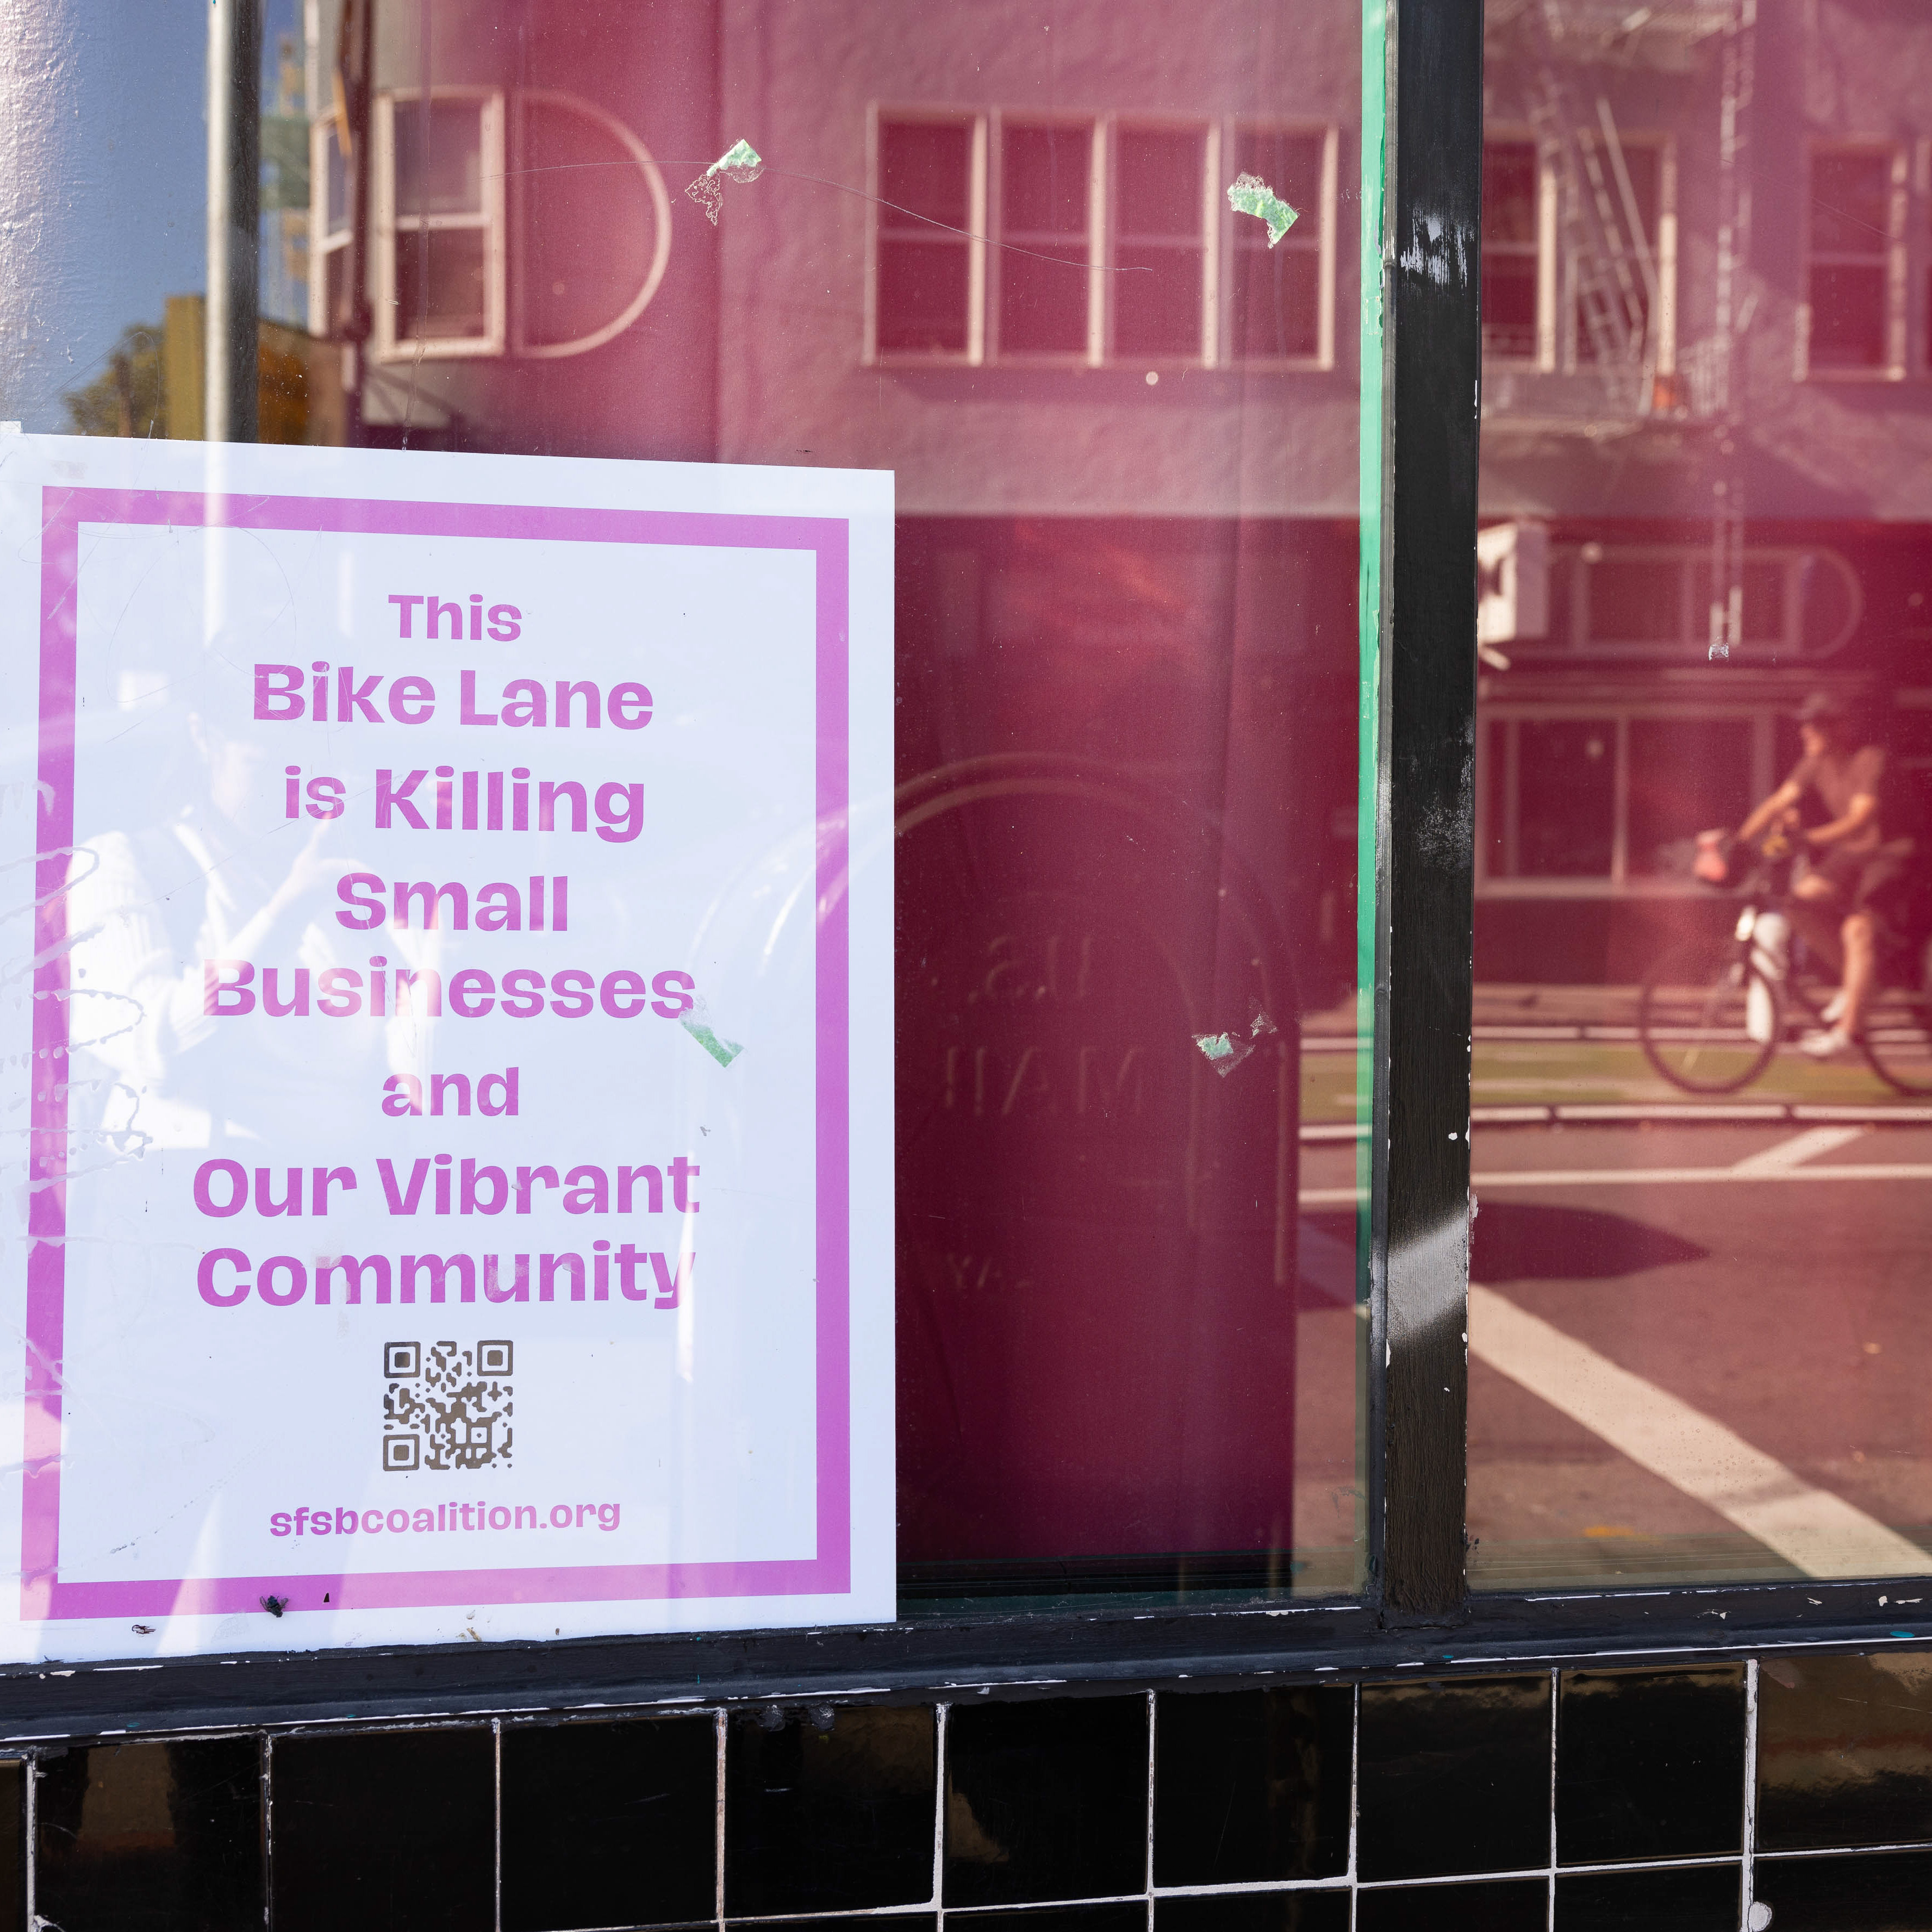 A sign in a shop window reads, &quot;This Bike Lane is Killing Small Businesses and Our Vibrant Community,&quot; with a QR code and an organization URL at the bottom.